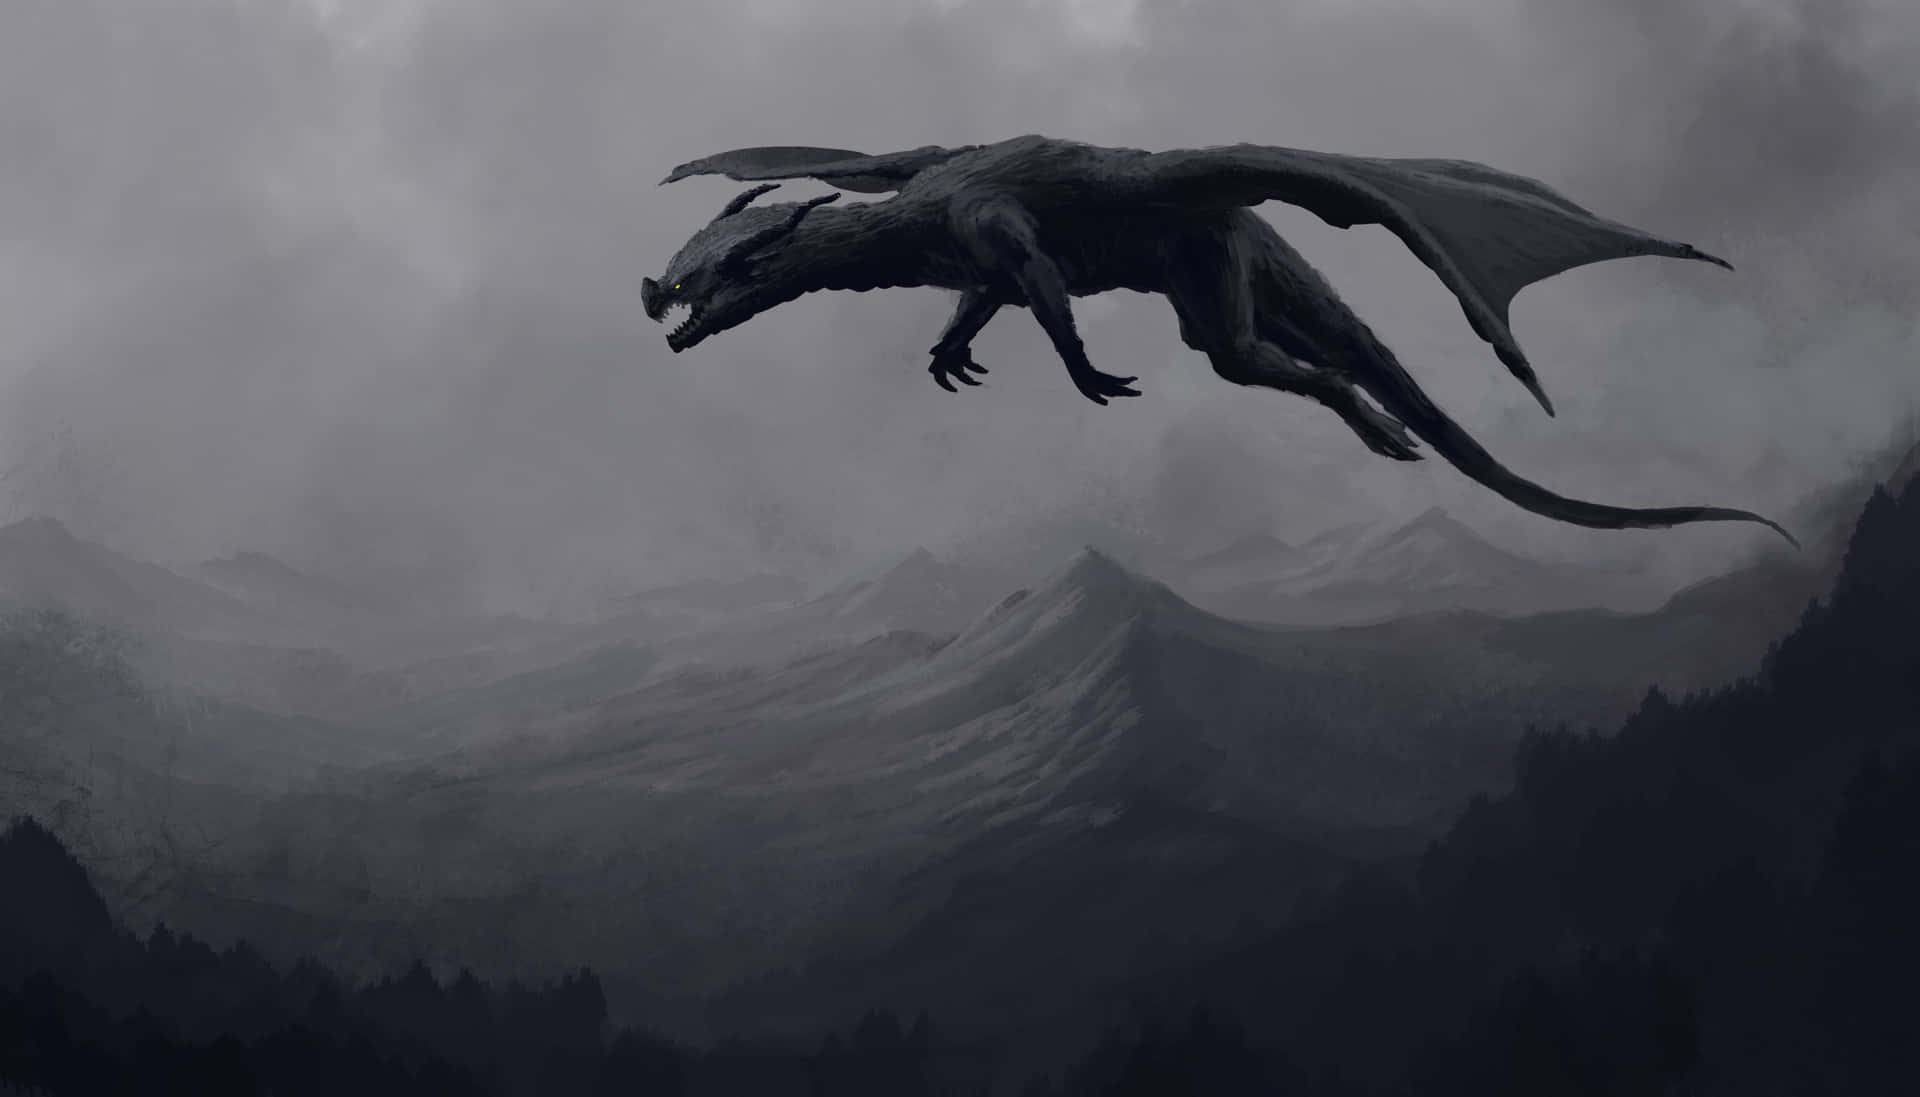 "A Scaled Beast Stirs To Life" Wallpaper